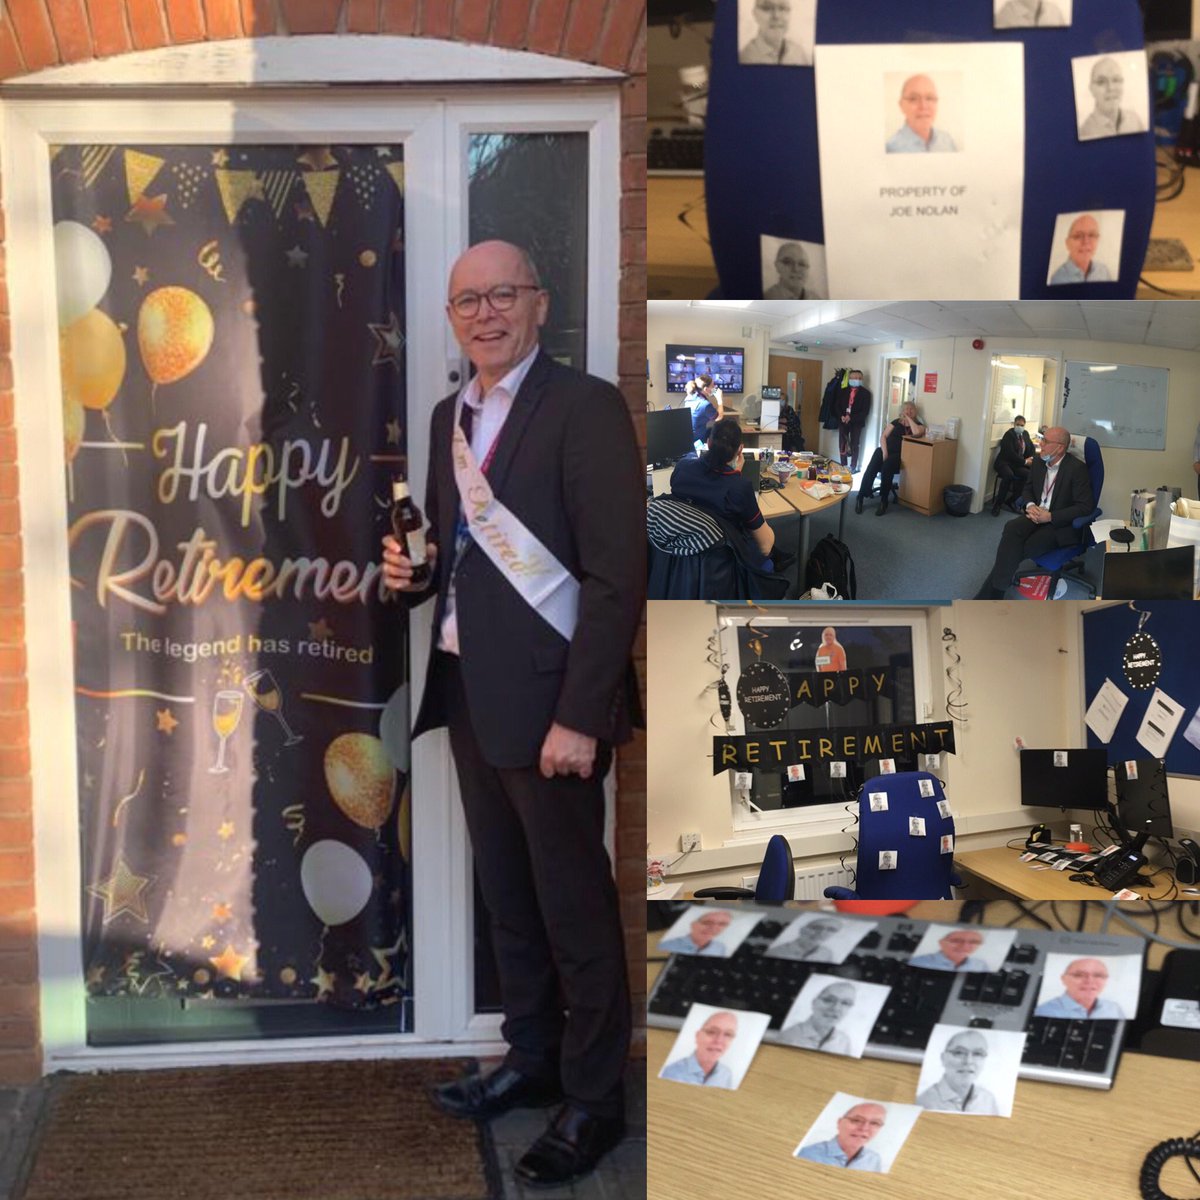 From all @AdultBchc we wish @joe051061 the happiest retirement ... thank you Joe for making @bhamcommunity a great place to work, you leave a legacy of kindness, compassion and commitment ⭐️ #NHSpeople #leadership #teamworkmakesthedreamwork #thankyou #newchapter